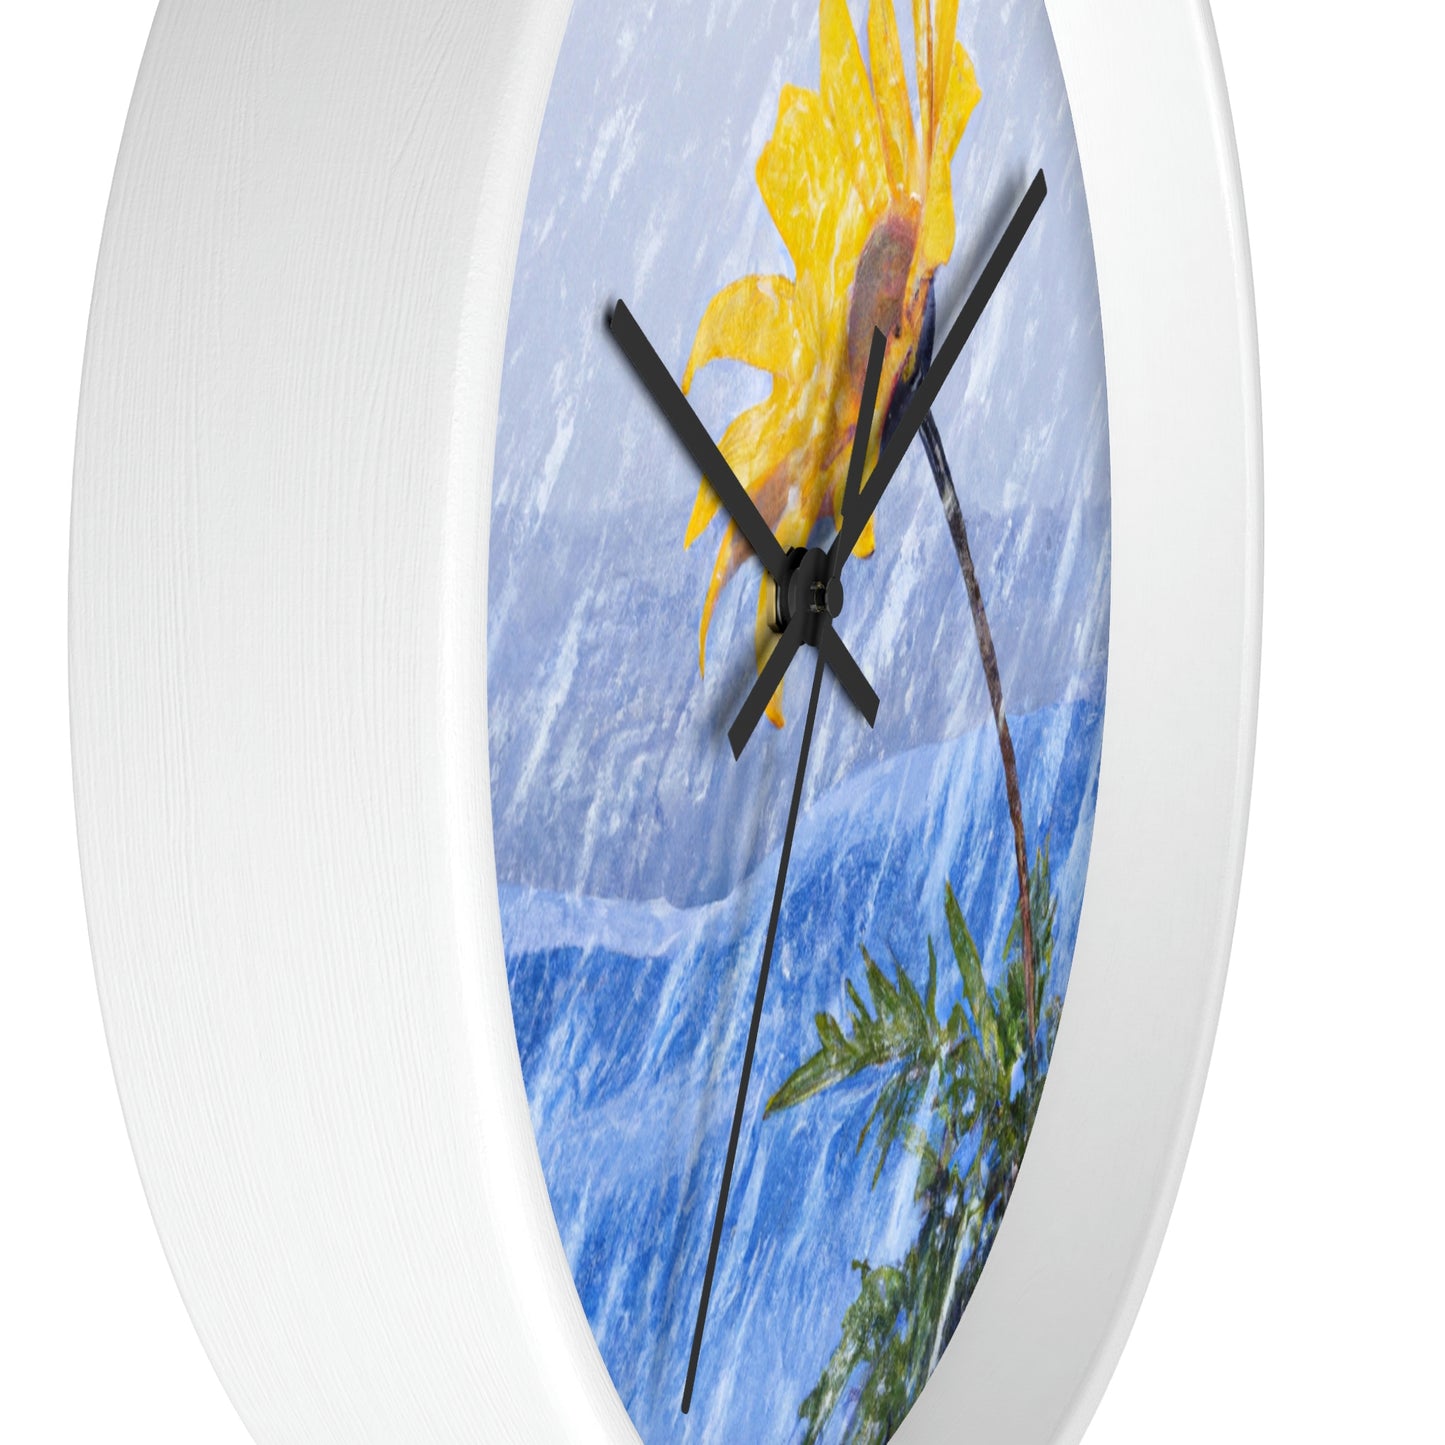 "A Burst of Color in the Glistening White: The Miracle of a Flower Blooms in a Snowstorm" - The Alien Wall Clock